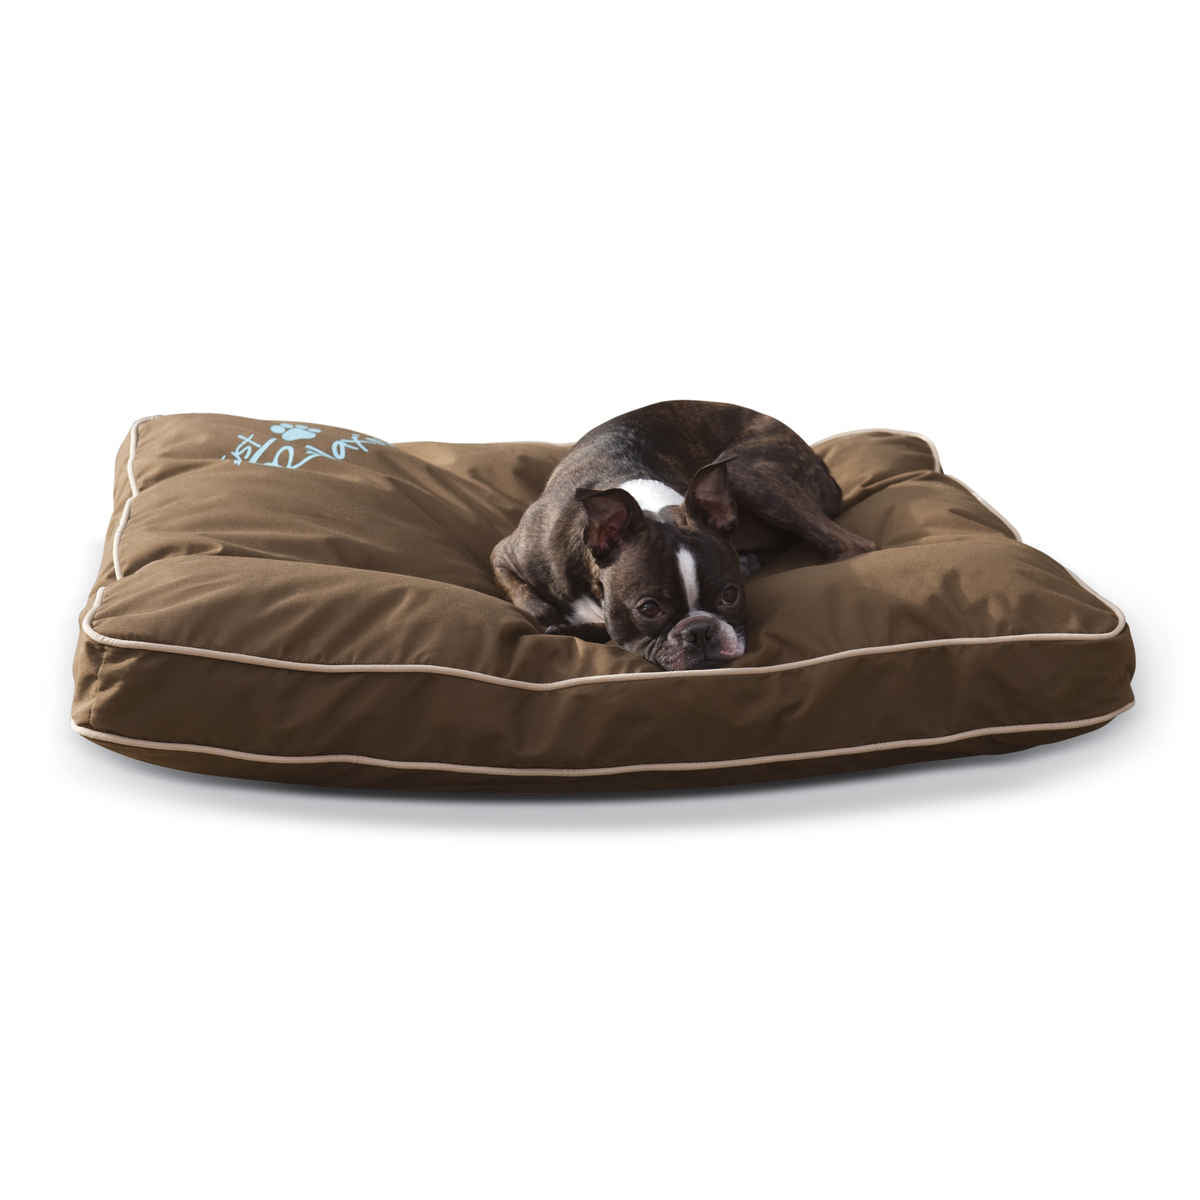 K&h Pet Products Kh7044 Just Relaxin